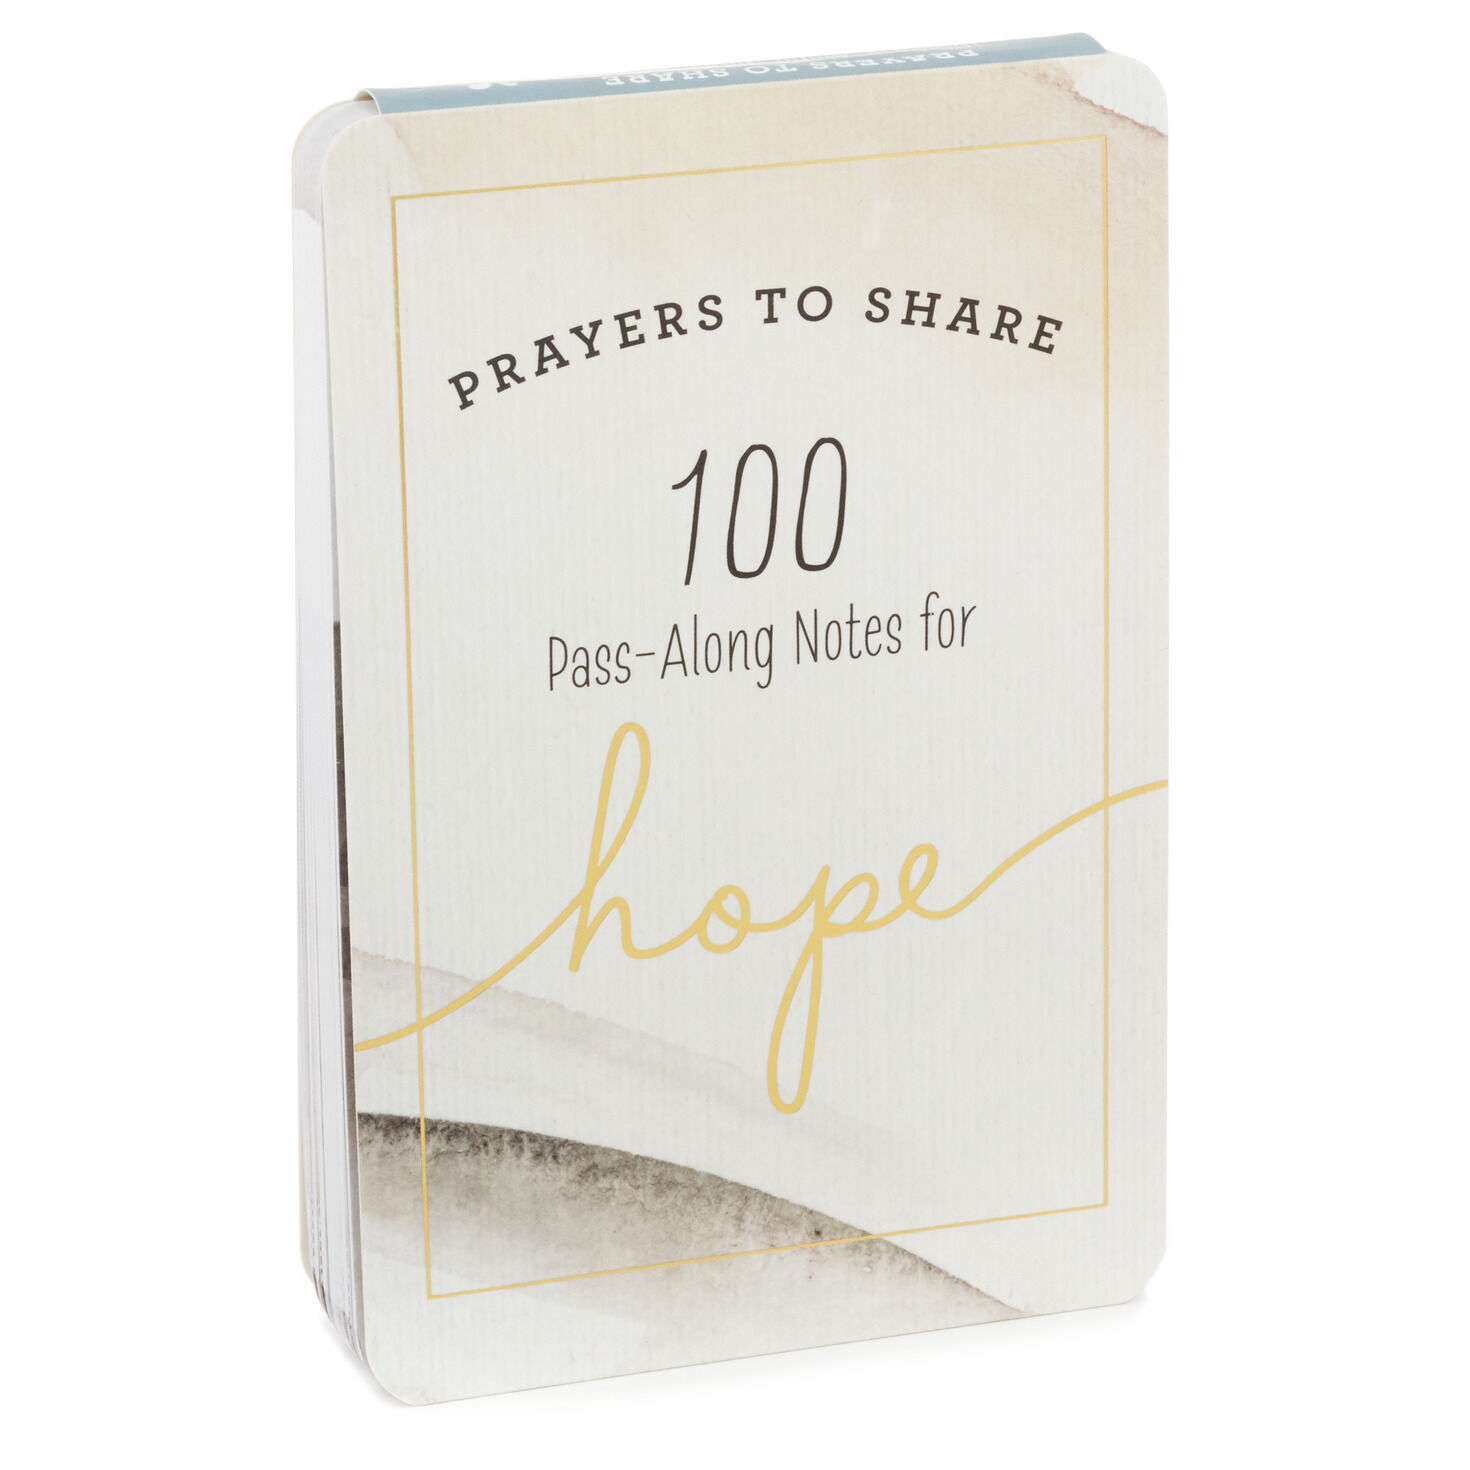 Prayers to Share: 100 Pass-Along Notes for Hope Book for only USD 9.99 | Hallmark